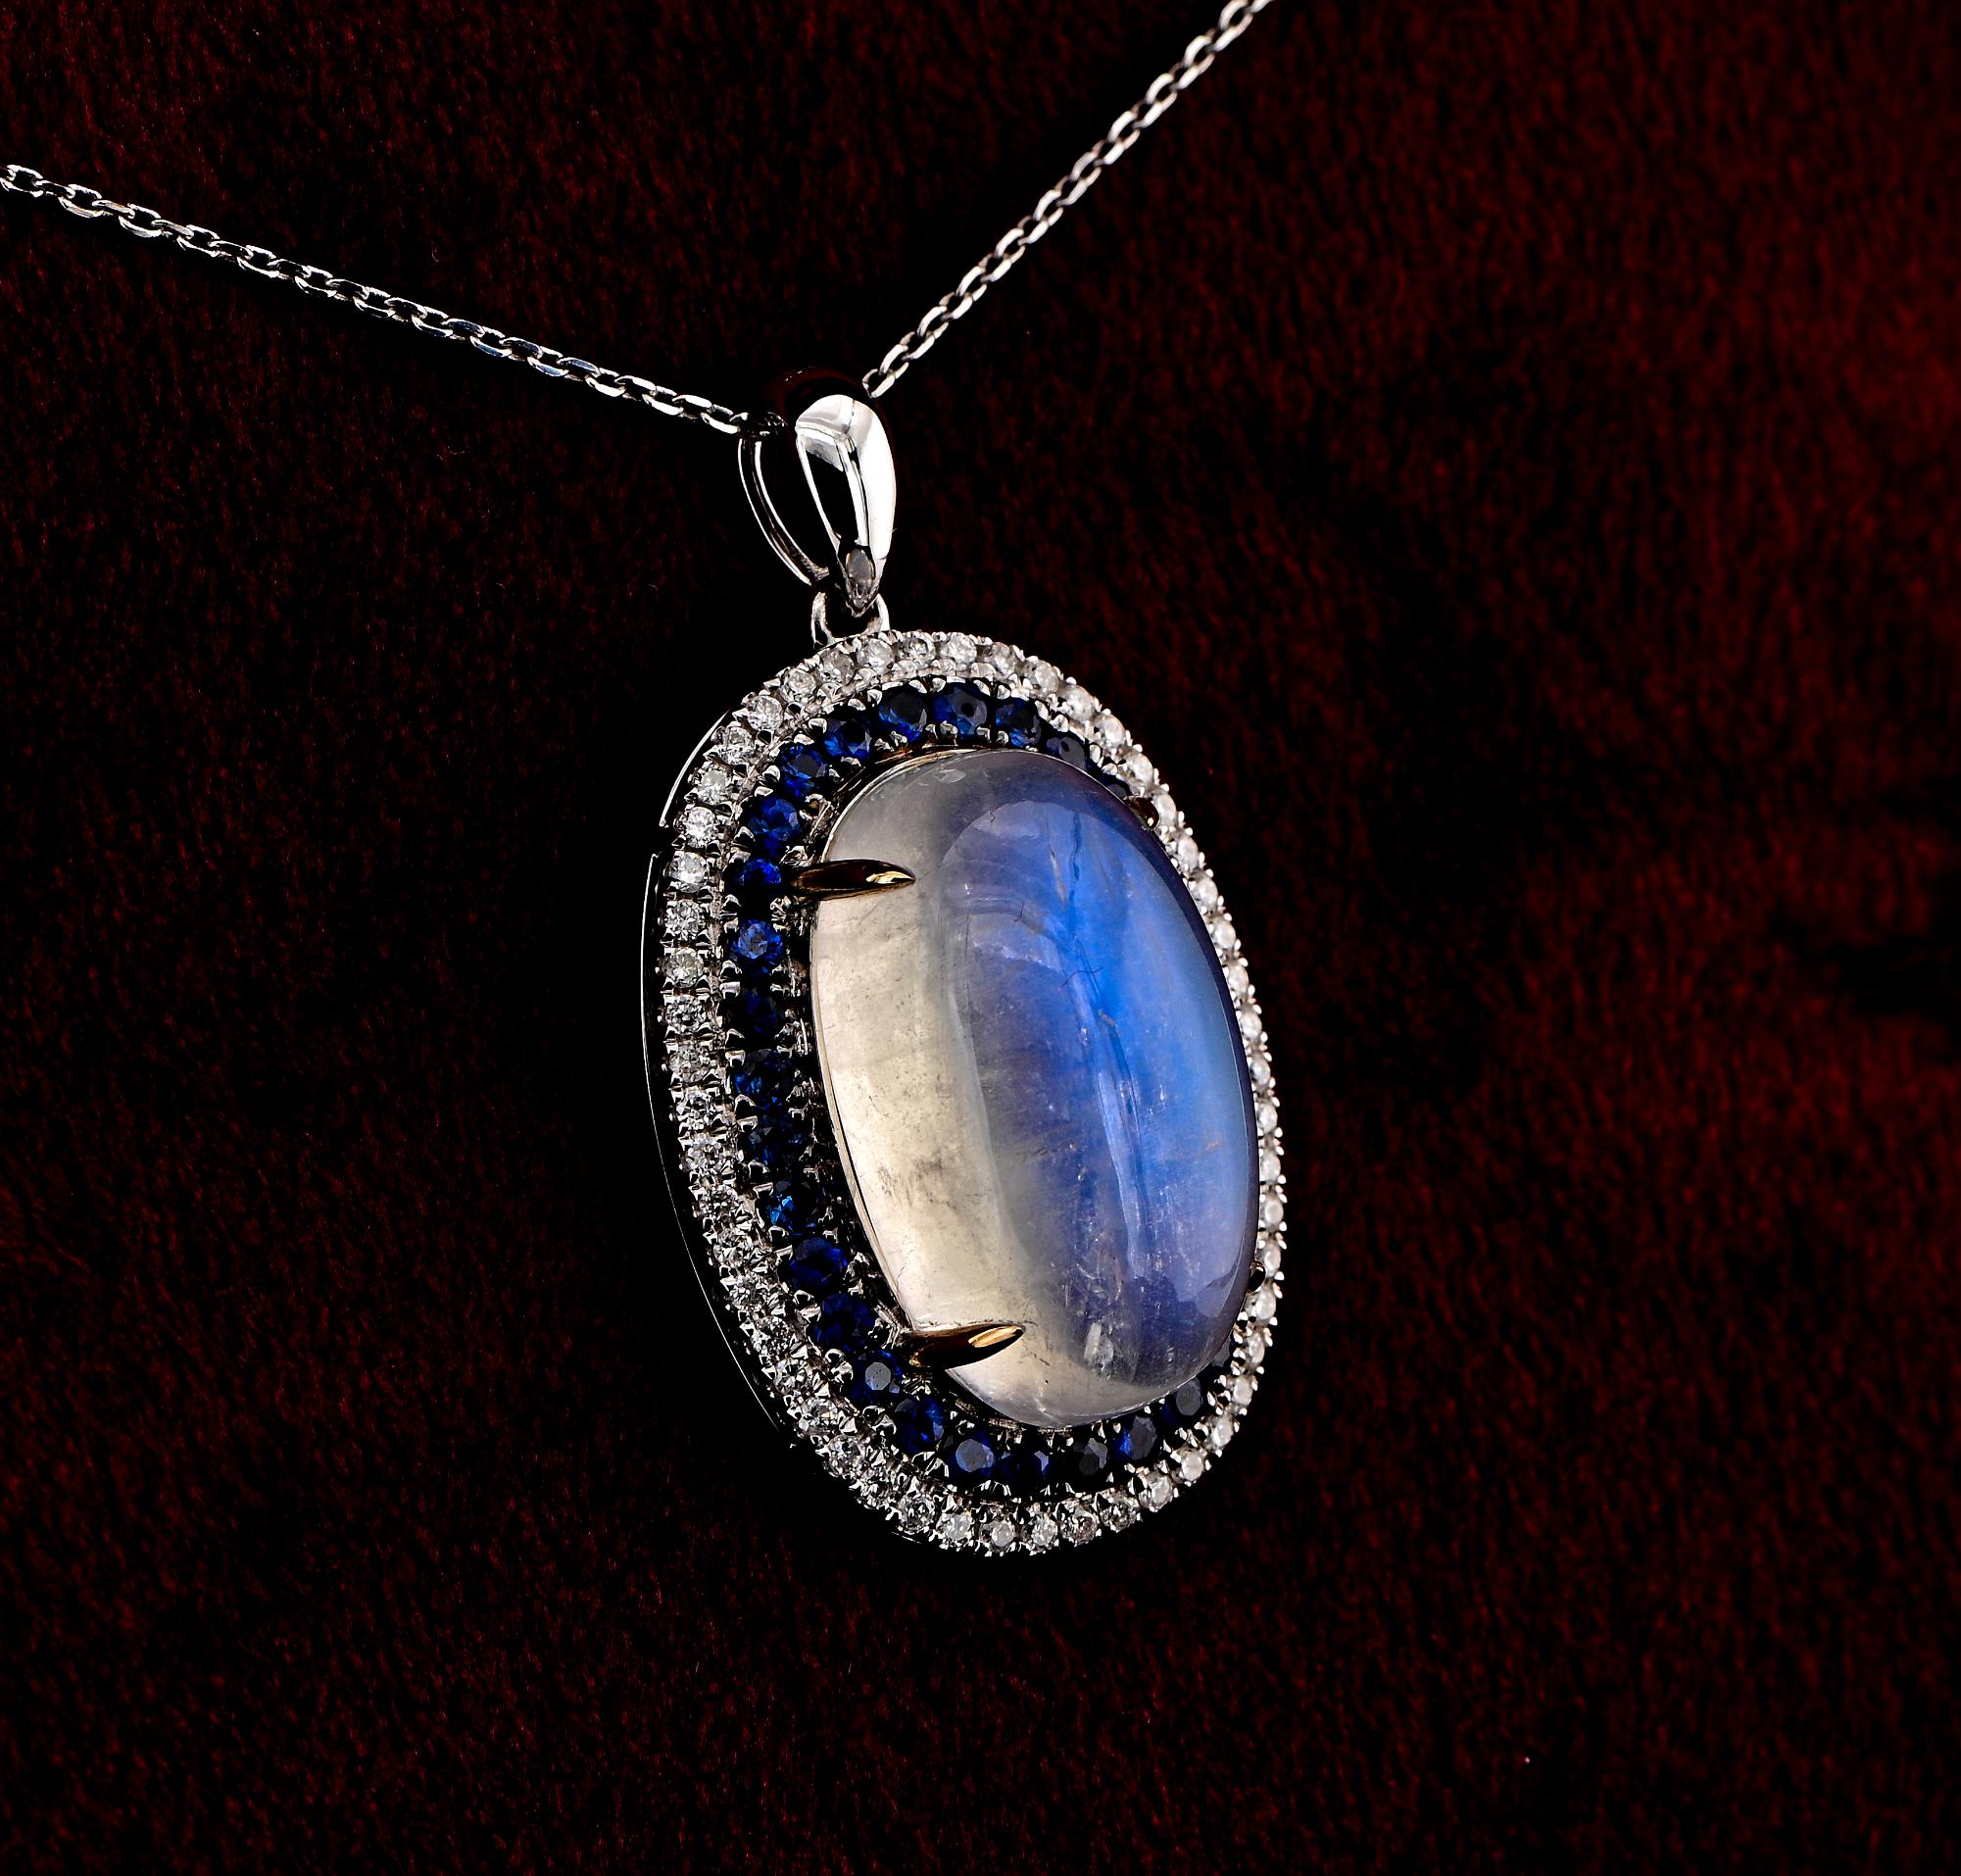 The Lunar Gemstone
This charming Rainbow Moonstone, Diamond and Sapphire pendant necklace is contemporary.
Classy, dynamic style, Art Deco Target inspired, suitable day night
Hand crafted of solid 18 KT white gold, marked
Eye catching large oval,